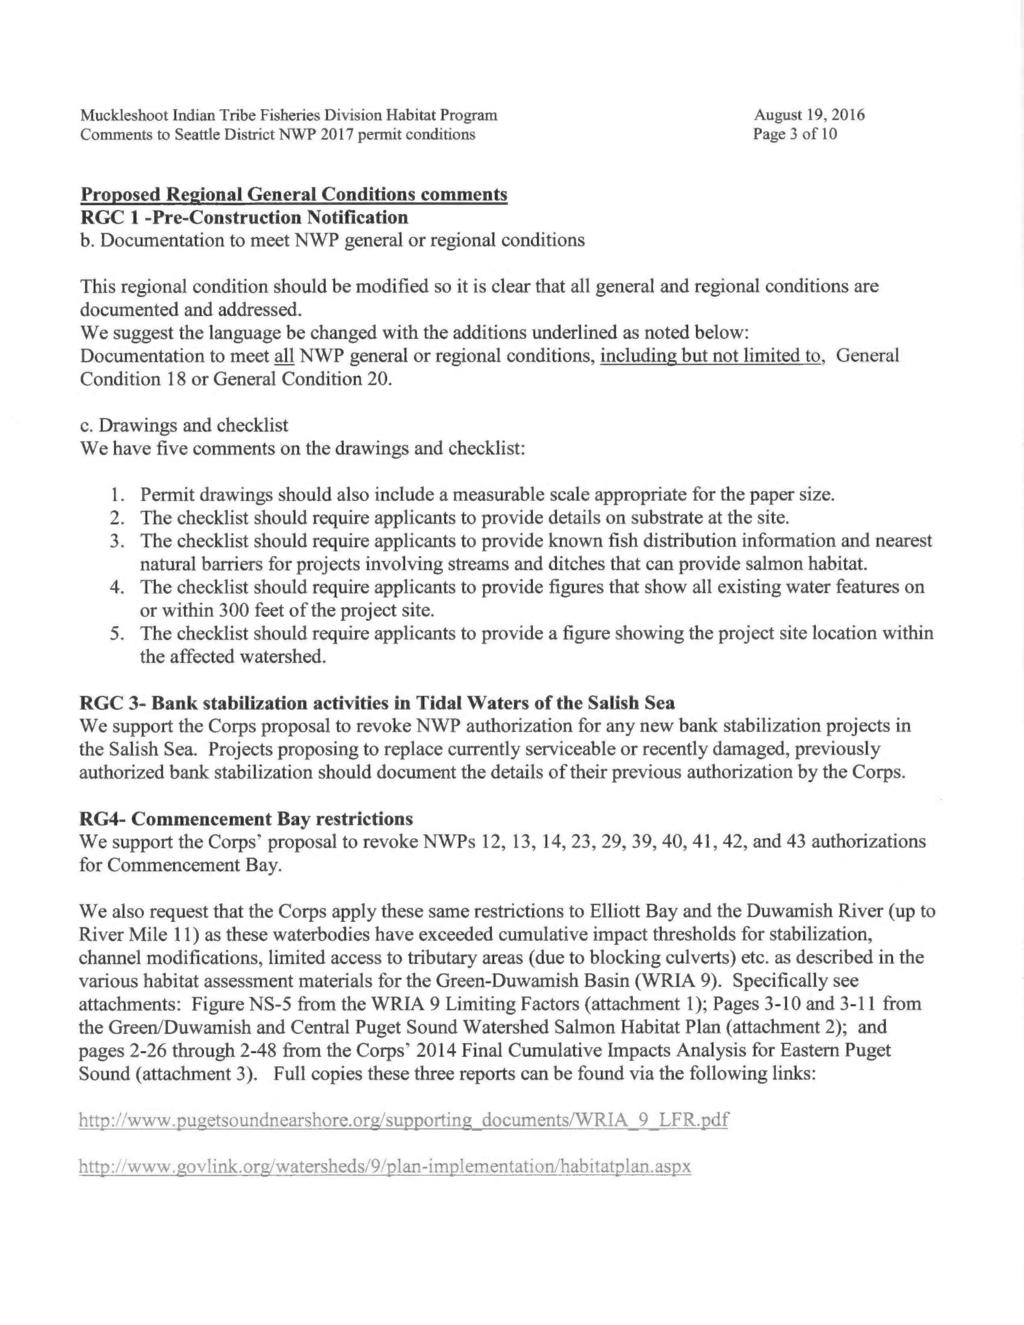 Page 3 oflo Proposed Regional General Conditions comments RGC 1 -Pre-Construction Notification b.